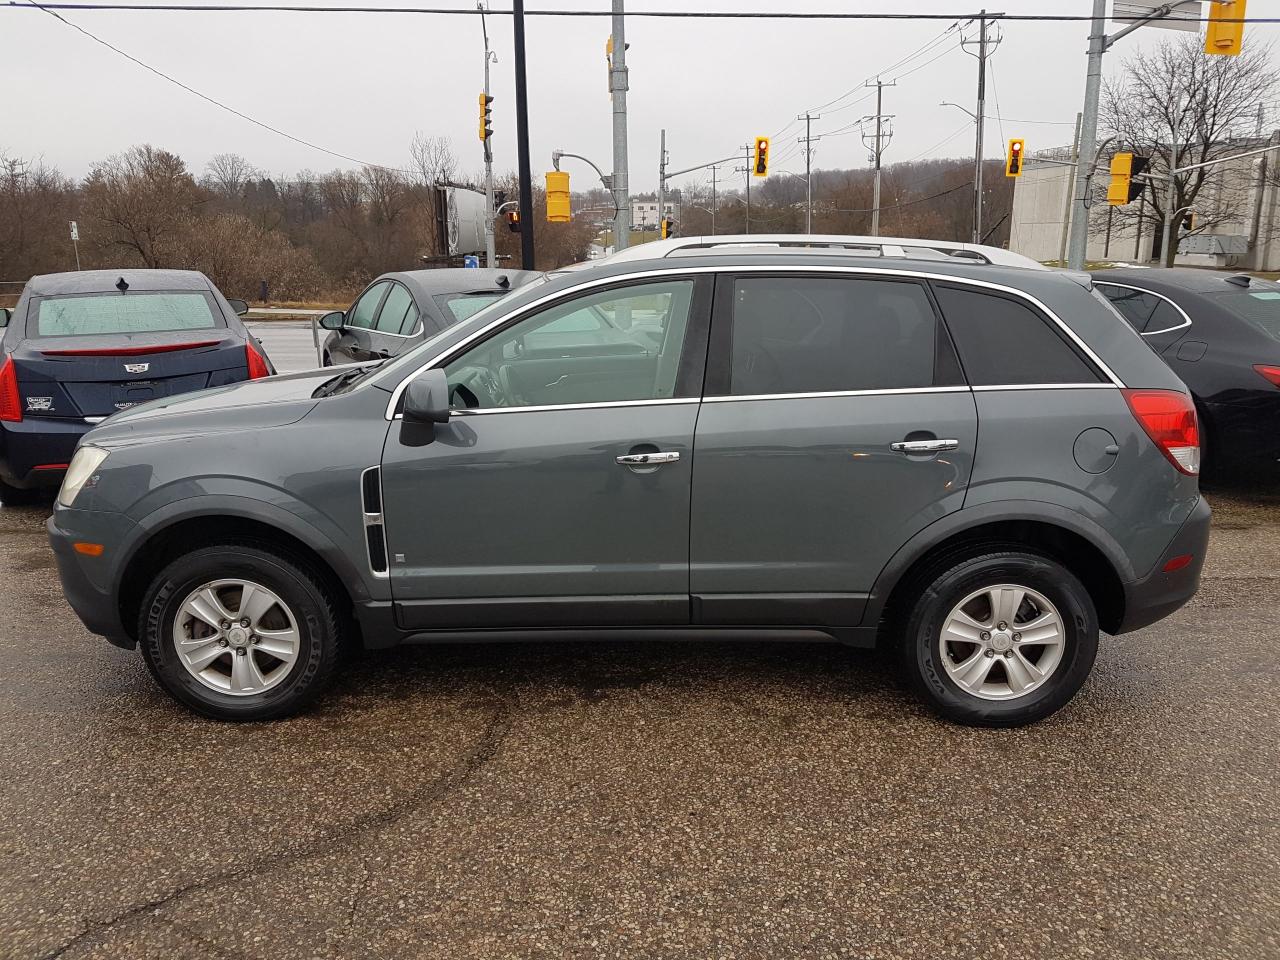 Used 2008 Saturn Vue Xe For Sale In Kitchener Ontario